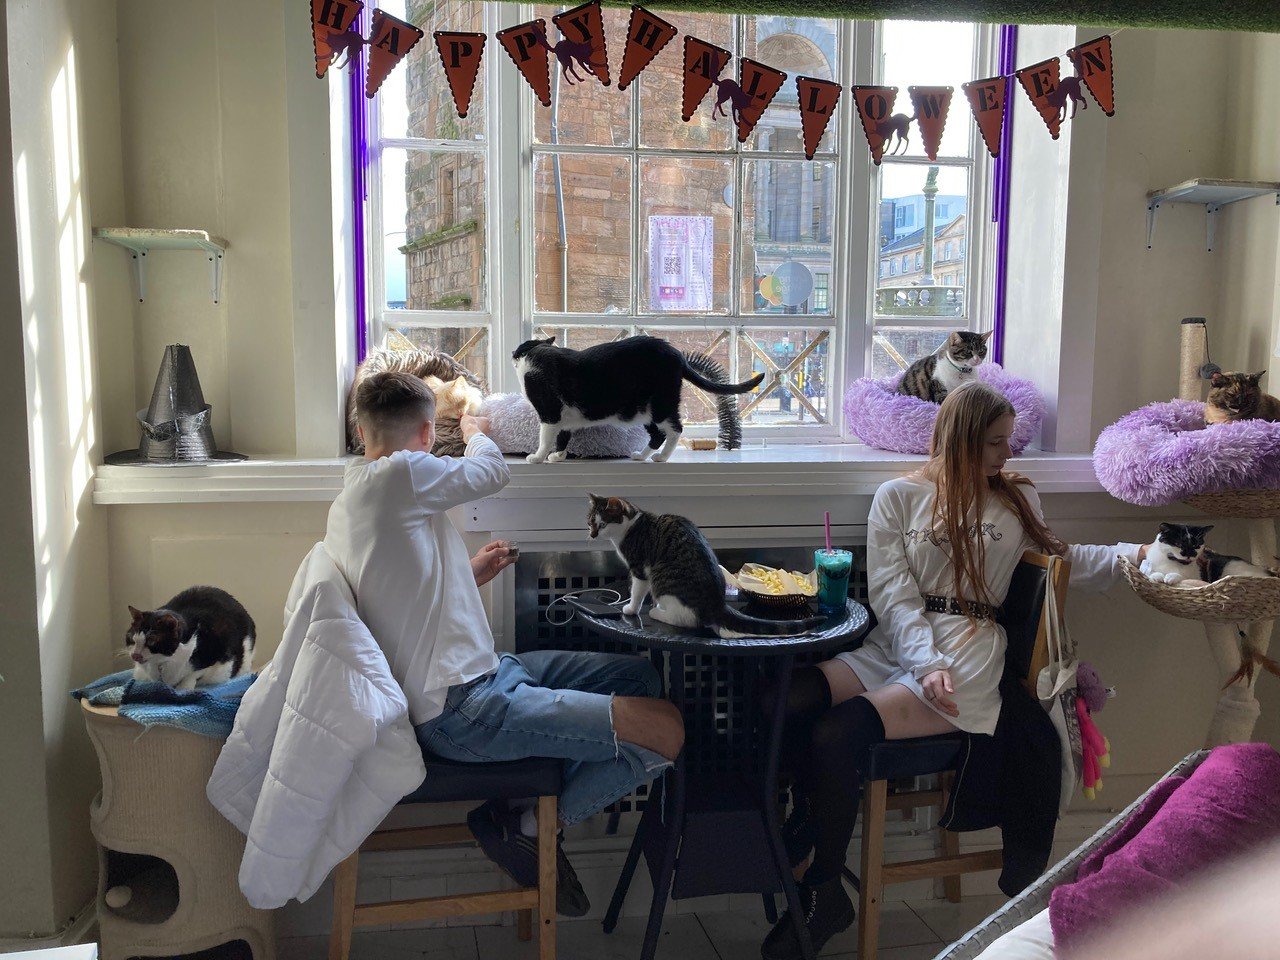 Silver City resident Vivian Savitt has been spending time in the Purrple Cat Cafe, on Trongate Road in Glasgow, Scotland and sent this image for our photo of the week.